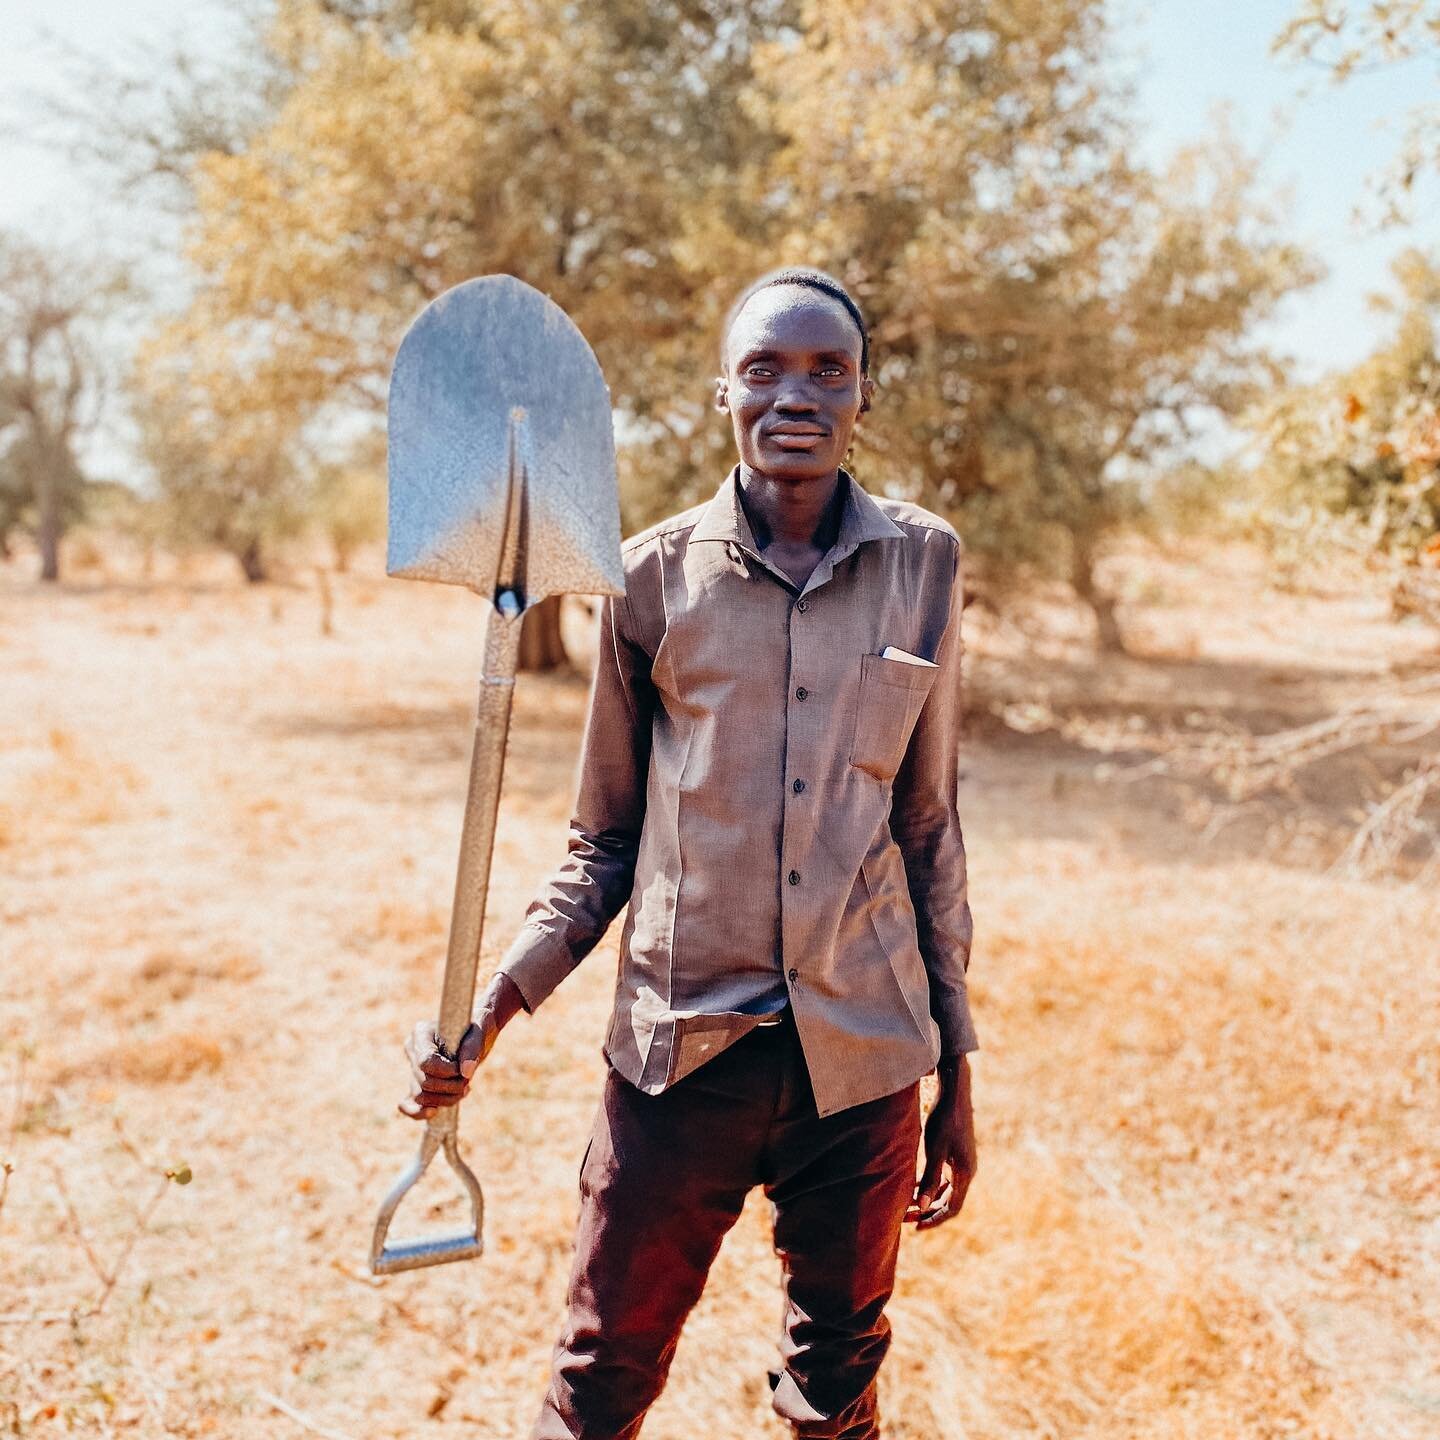 GEMS is currently raising money for clean water in South Sudan. Clean water will improve health and hydration for the people. While also securing a water source for crops!

Having a reliable water source is necessary for growing food during the six-m